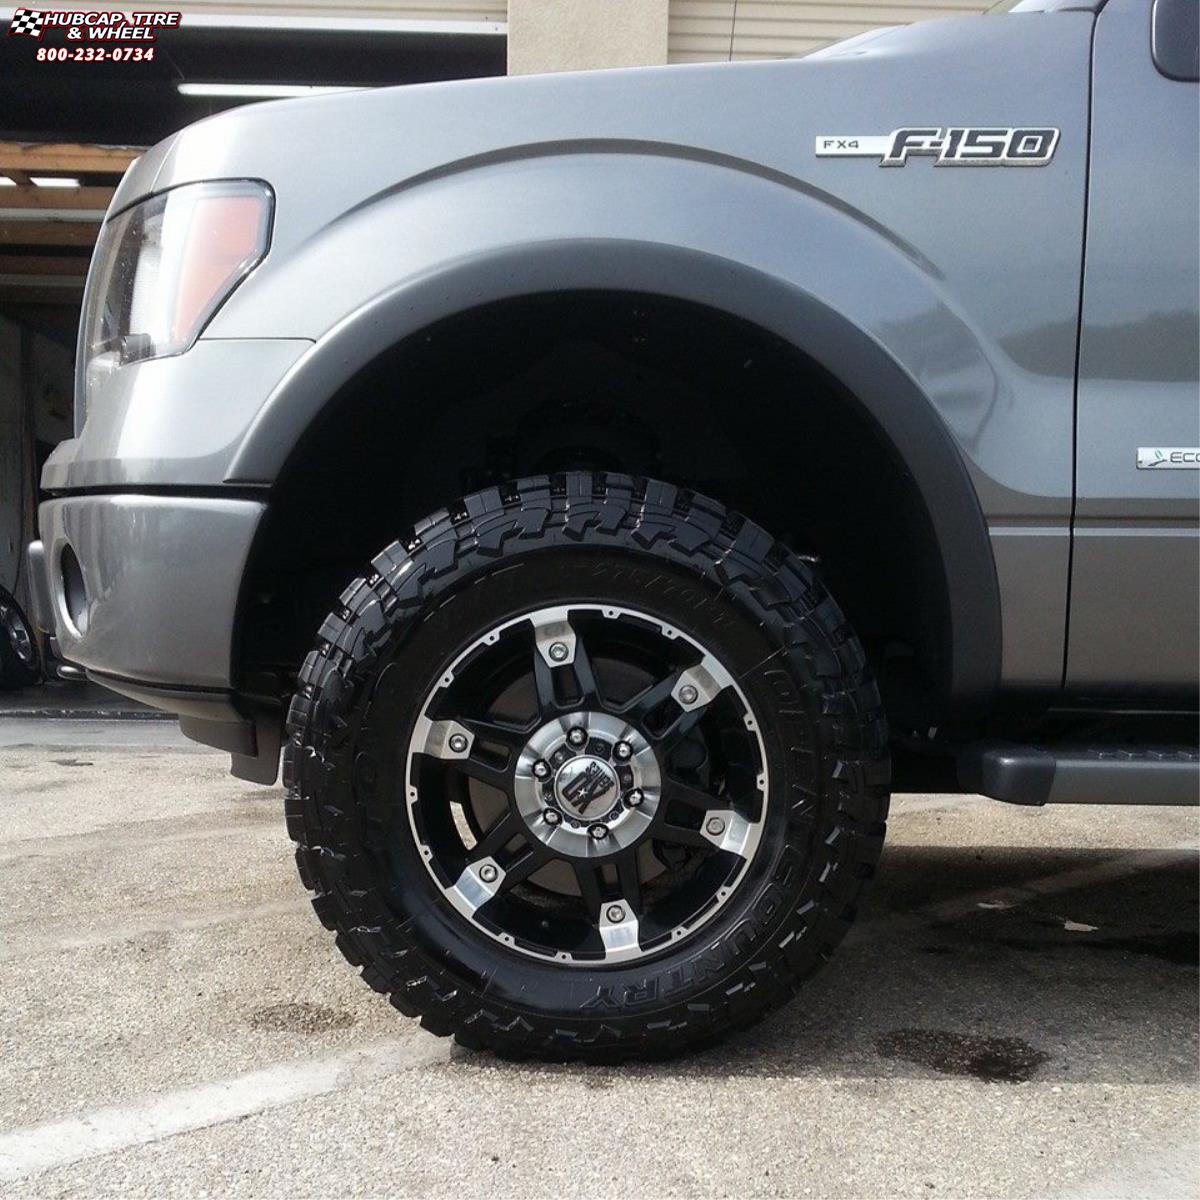 vehicle gallery/ford f 150 xd series xd797 spy x  Gloss Black Machined wheels and rims